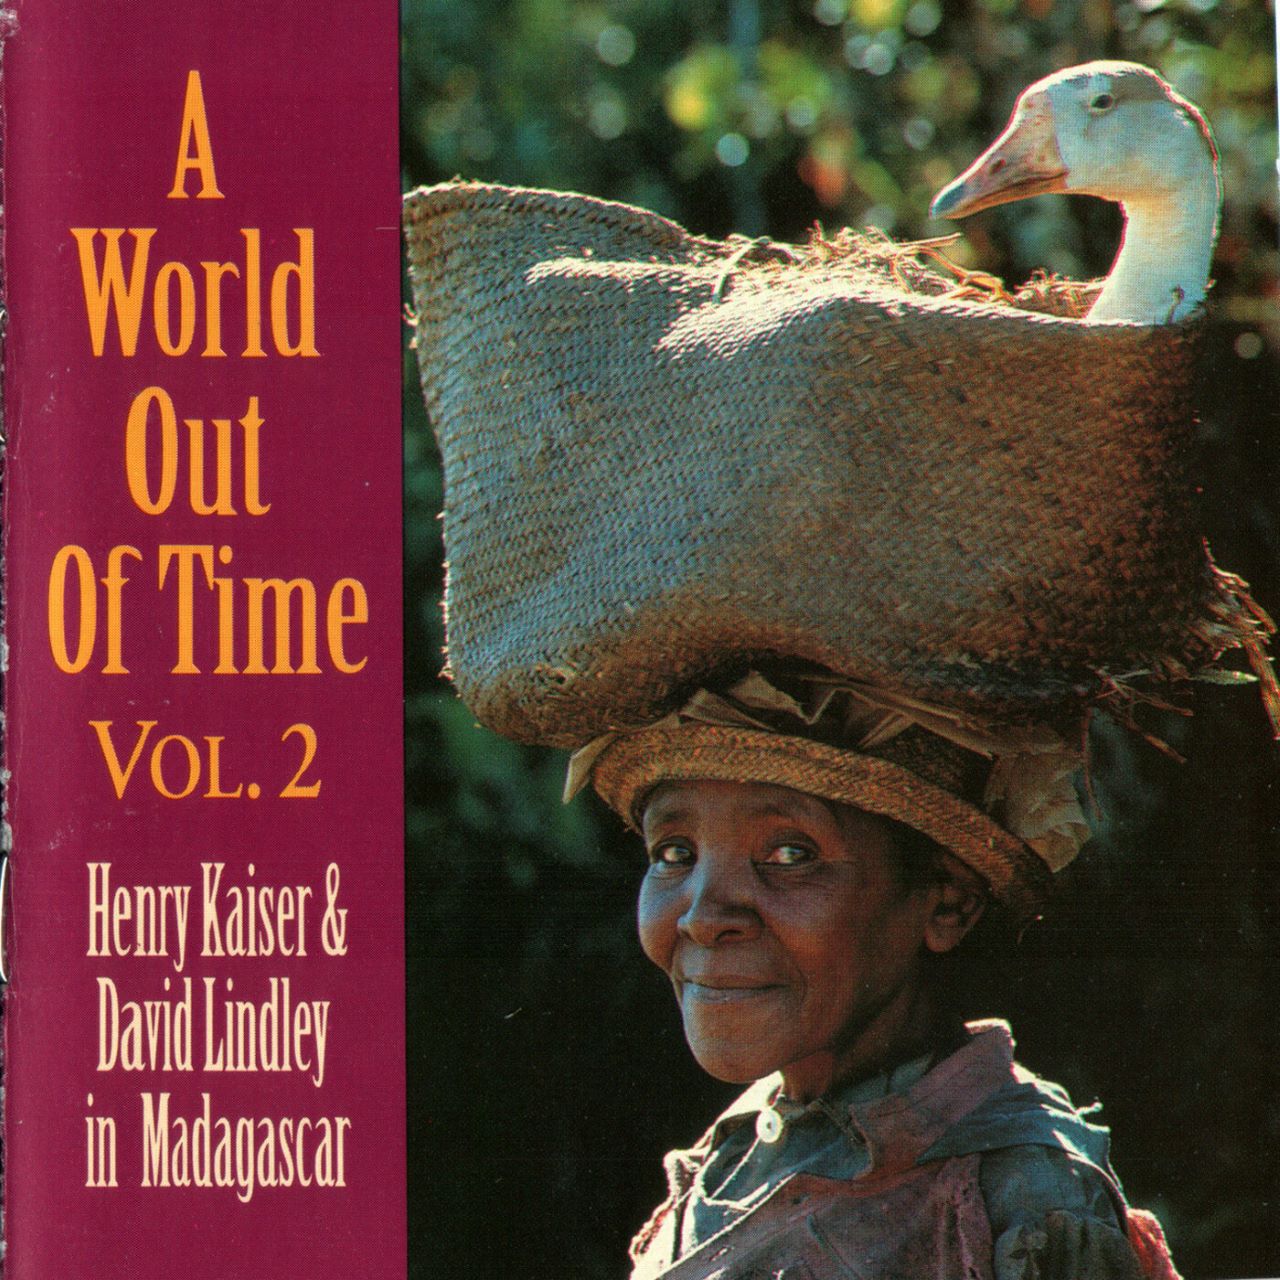 Henry Kaiser & David Lindley – A World Out Of Time Vol. 2 cover album